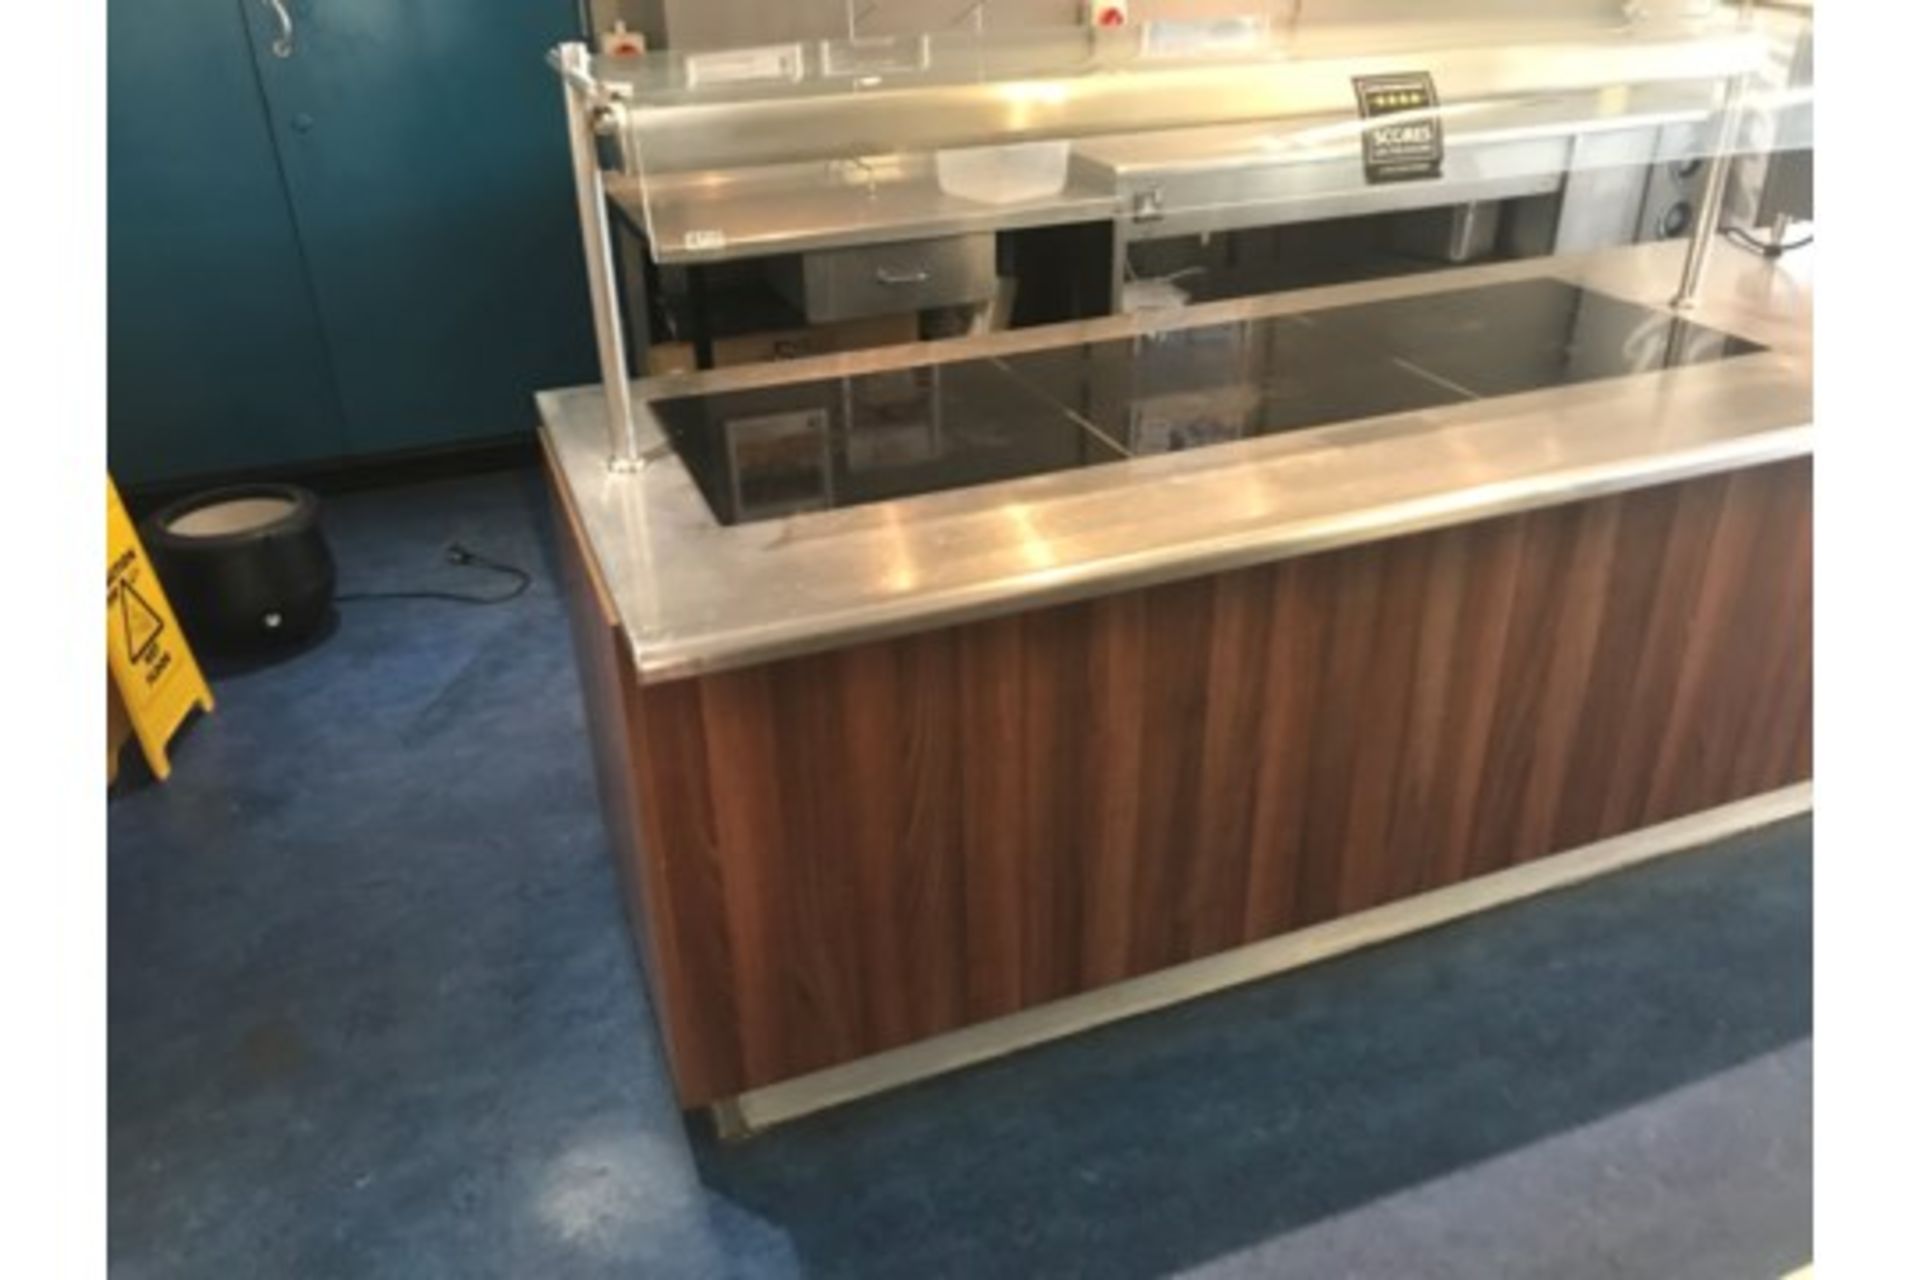 Catering Service Counter - Image 11 of 11